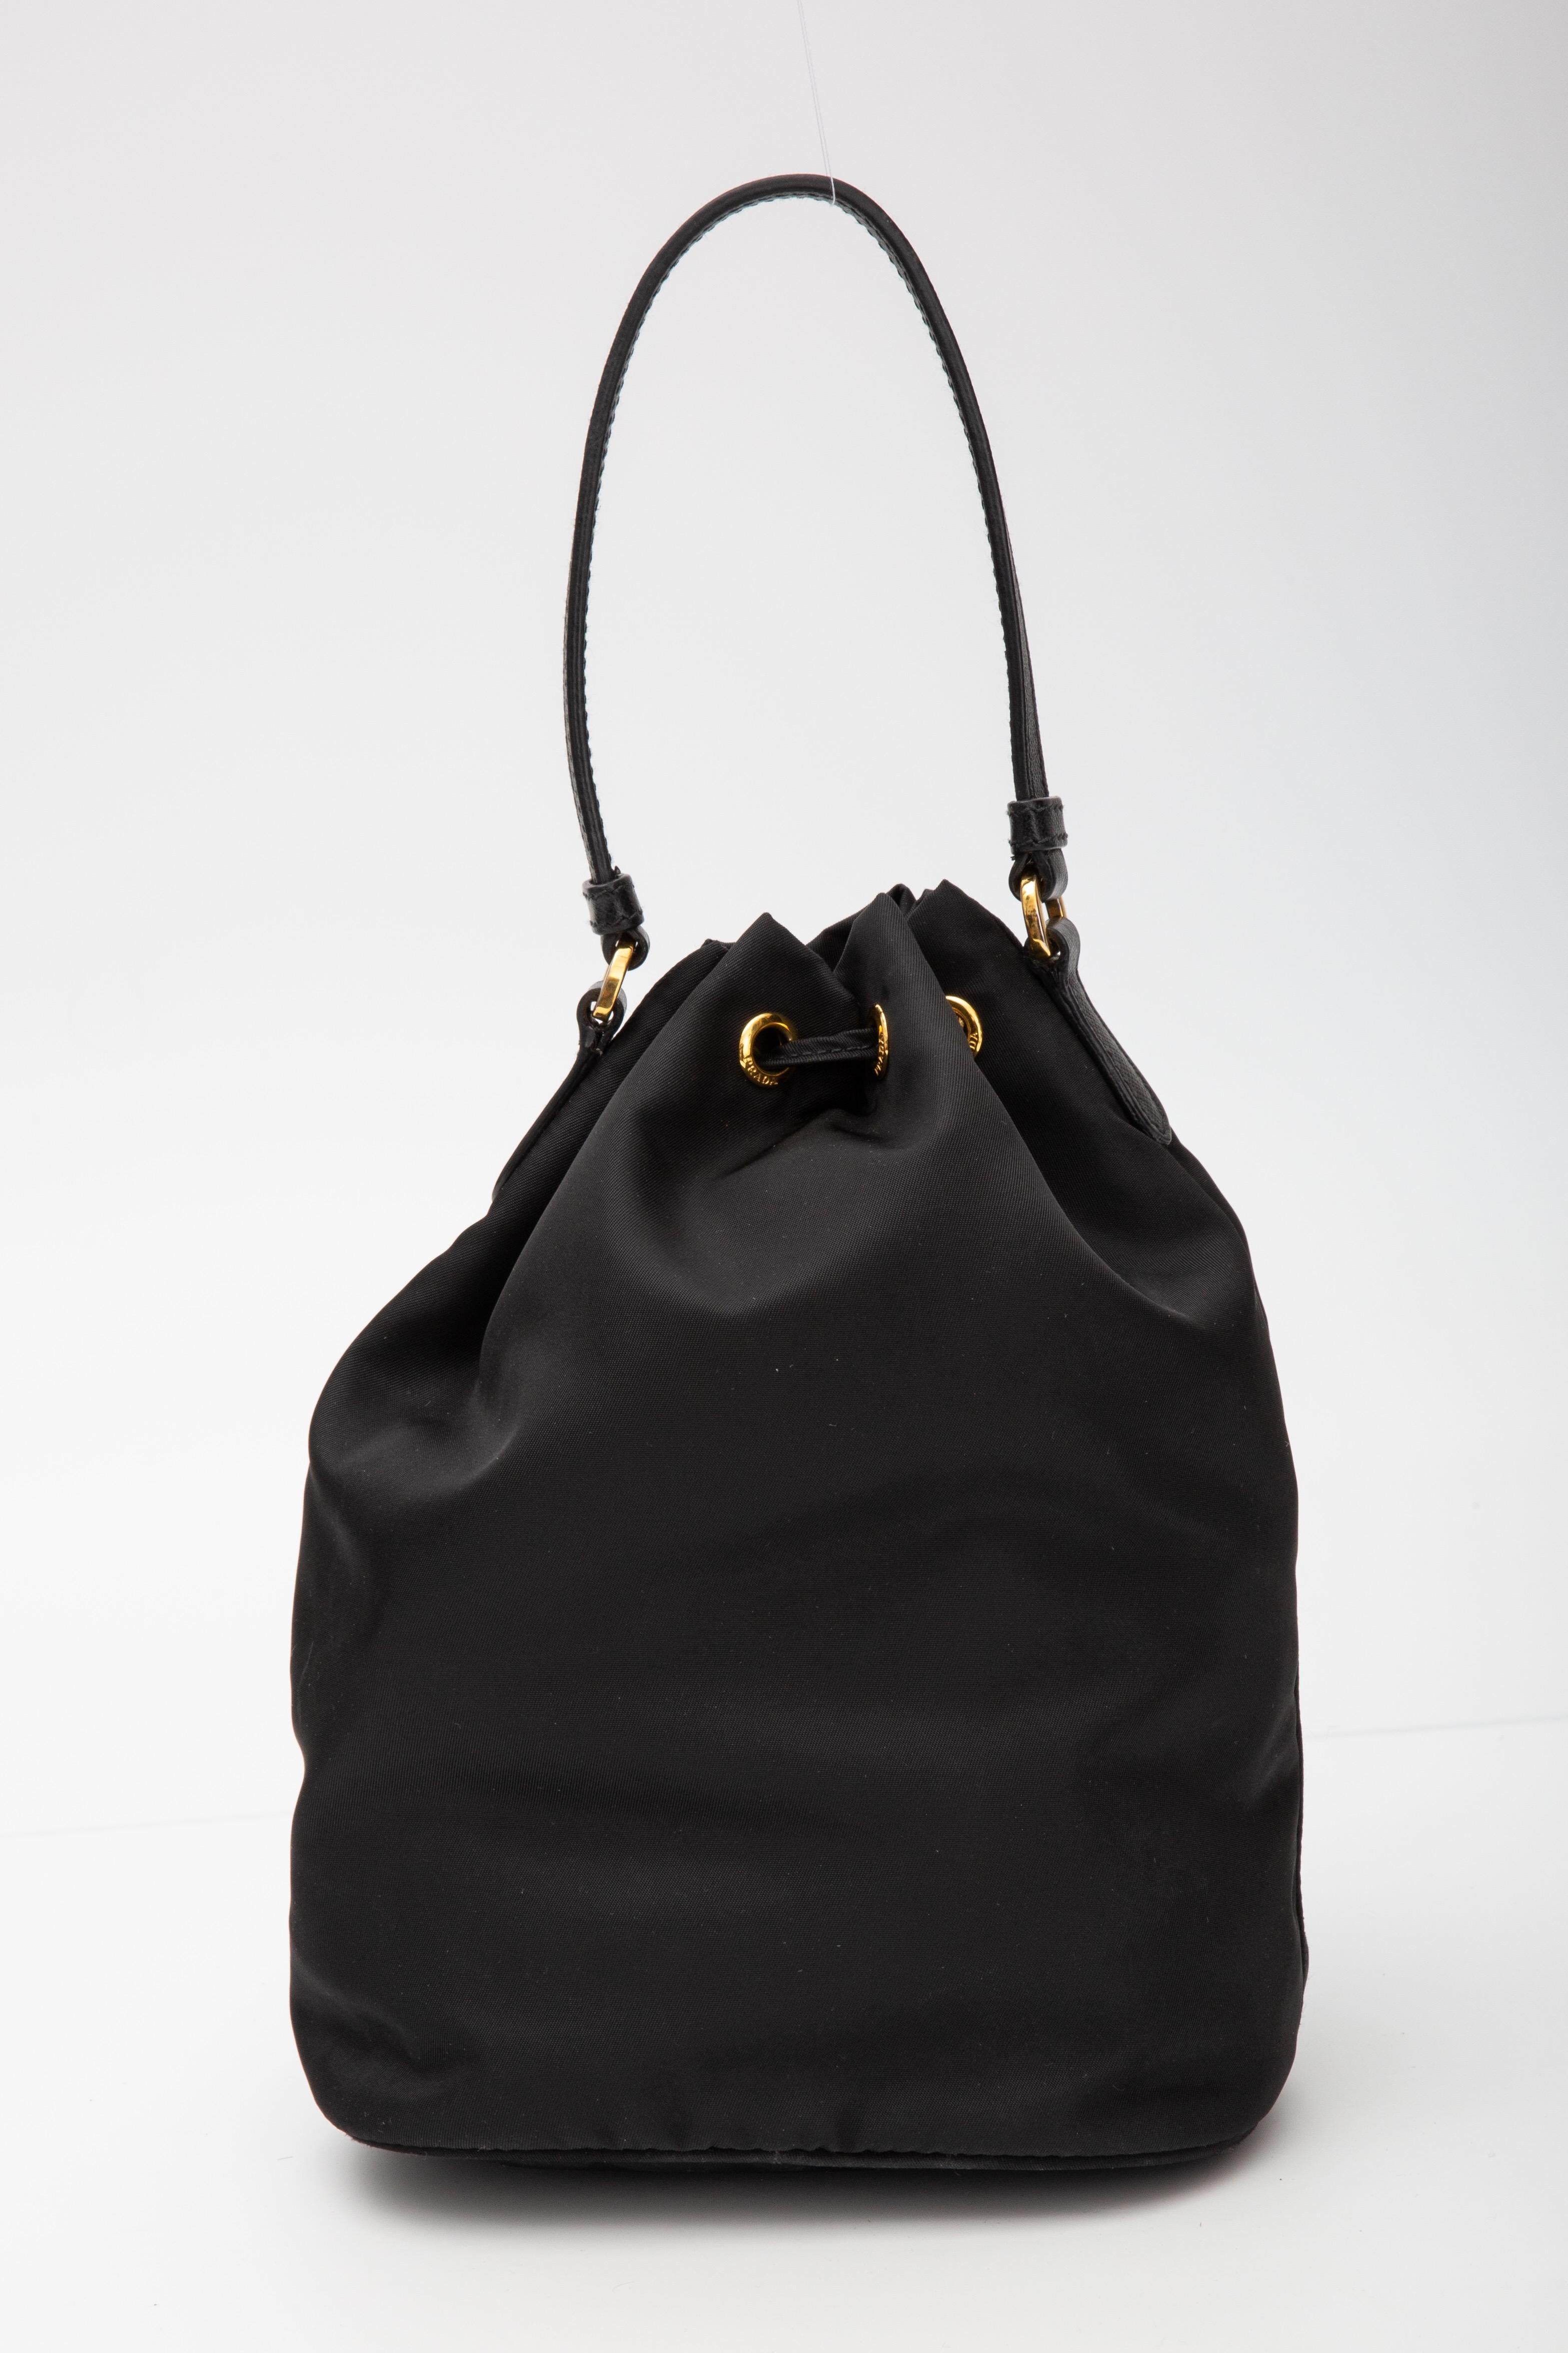 This Prada bag is made with black re-nylon and features gold tone hardware, drawstring closure, saffiano leather details, a leather adjustable and attachable shoulder strap, a front zip pocket and an open interior with logo jacquard woven fabric